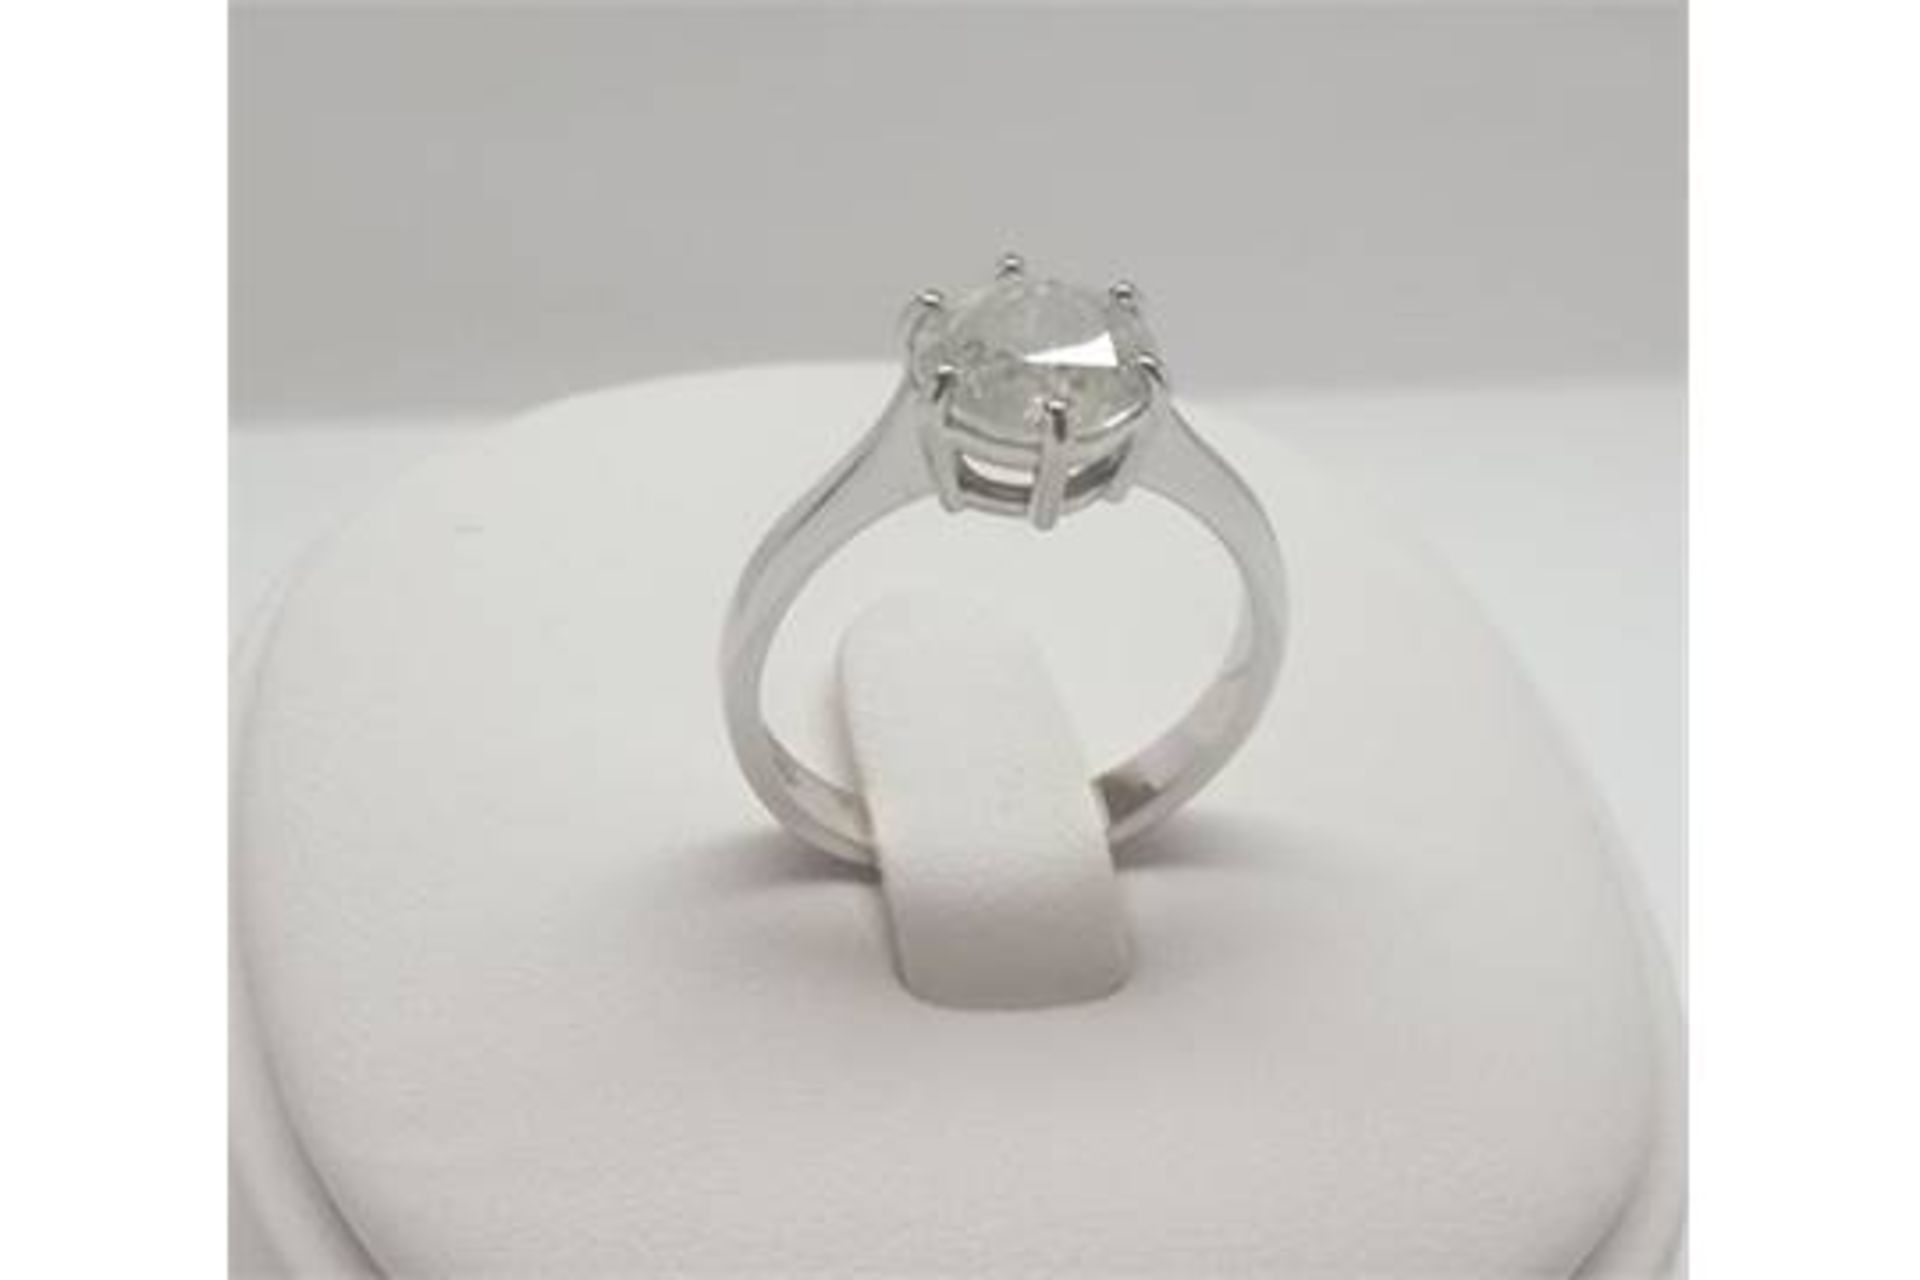 A 2.0 Carat Diamond Ring. This auction is for Diamond ring set in 9K white gold, - Image 2 of 2